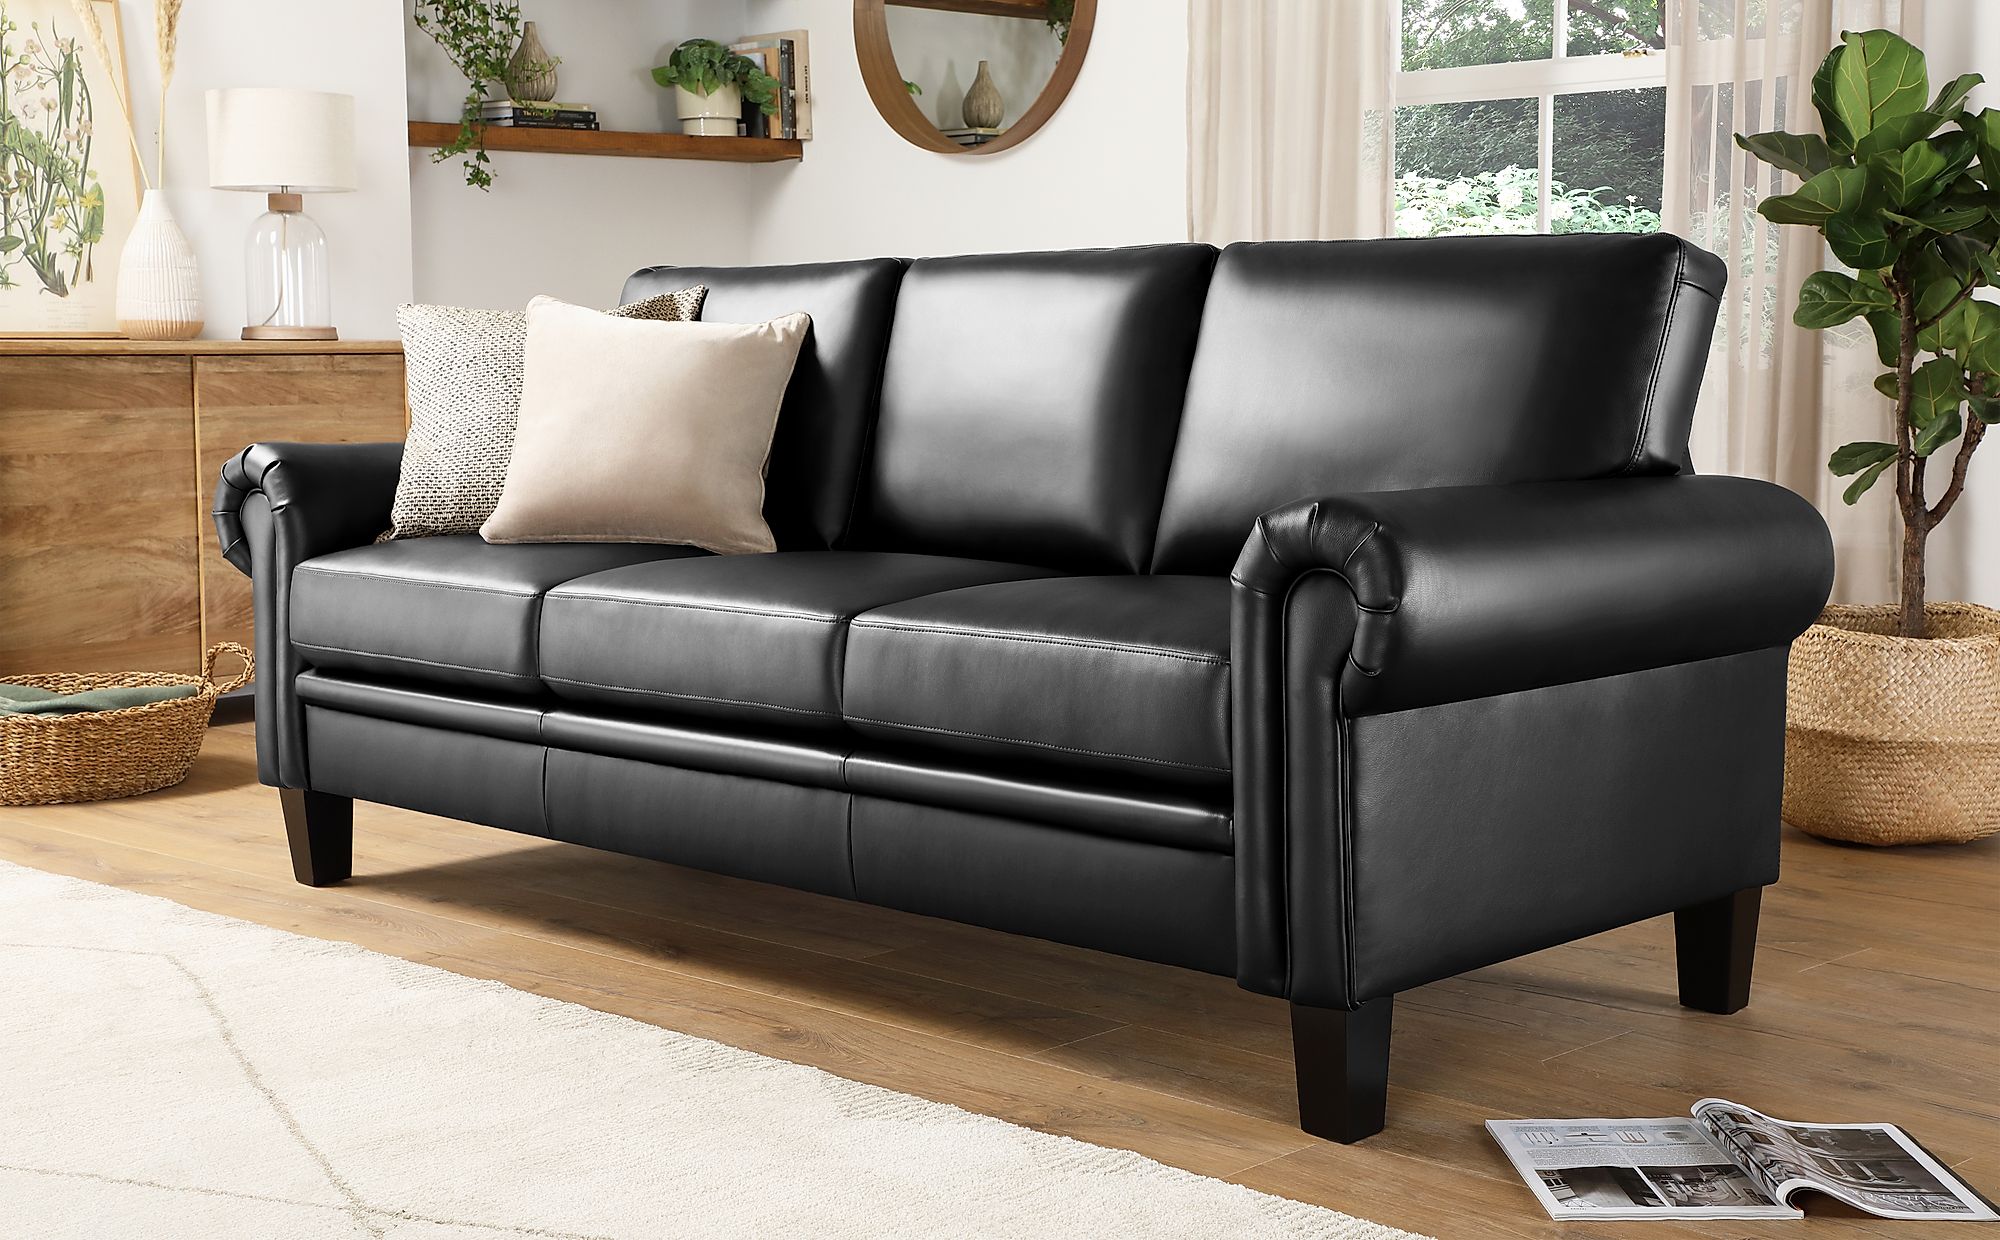 53 Impressive navona 3 seater leather sofa For Every Budget